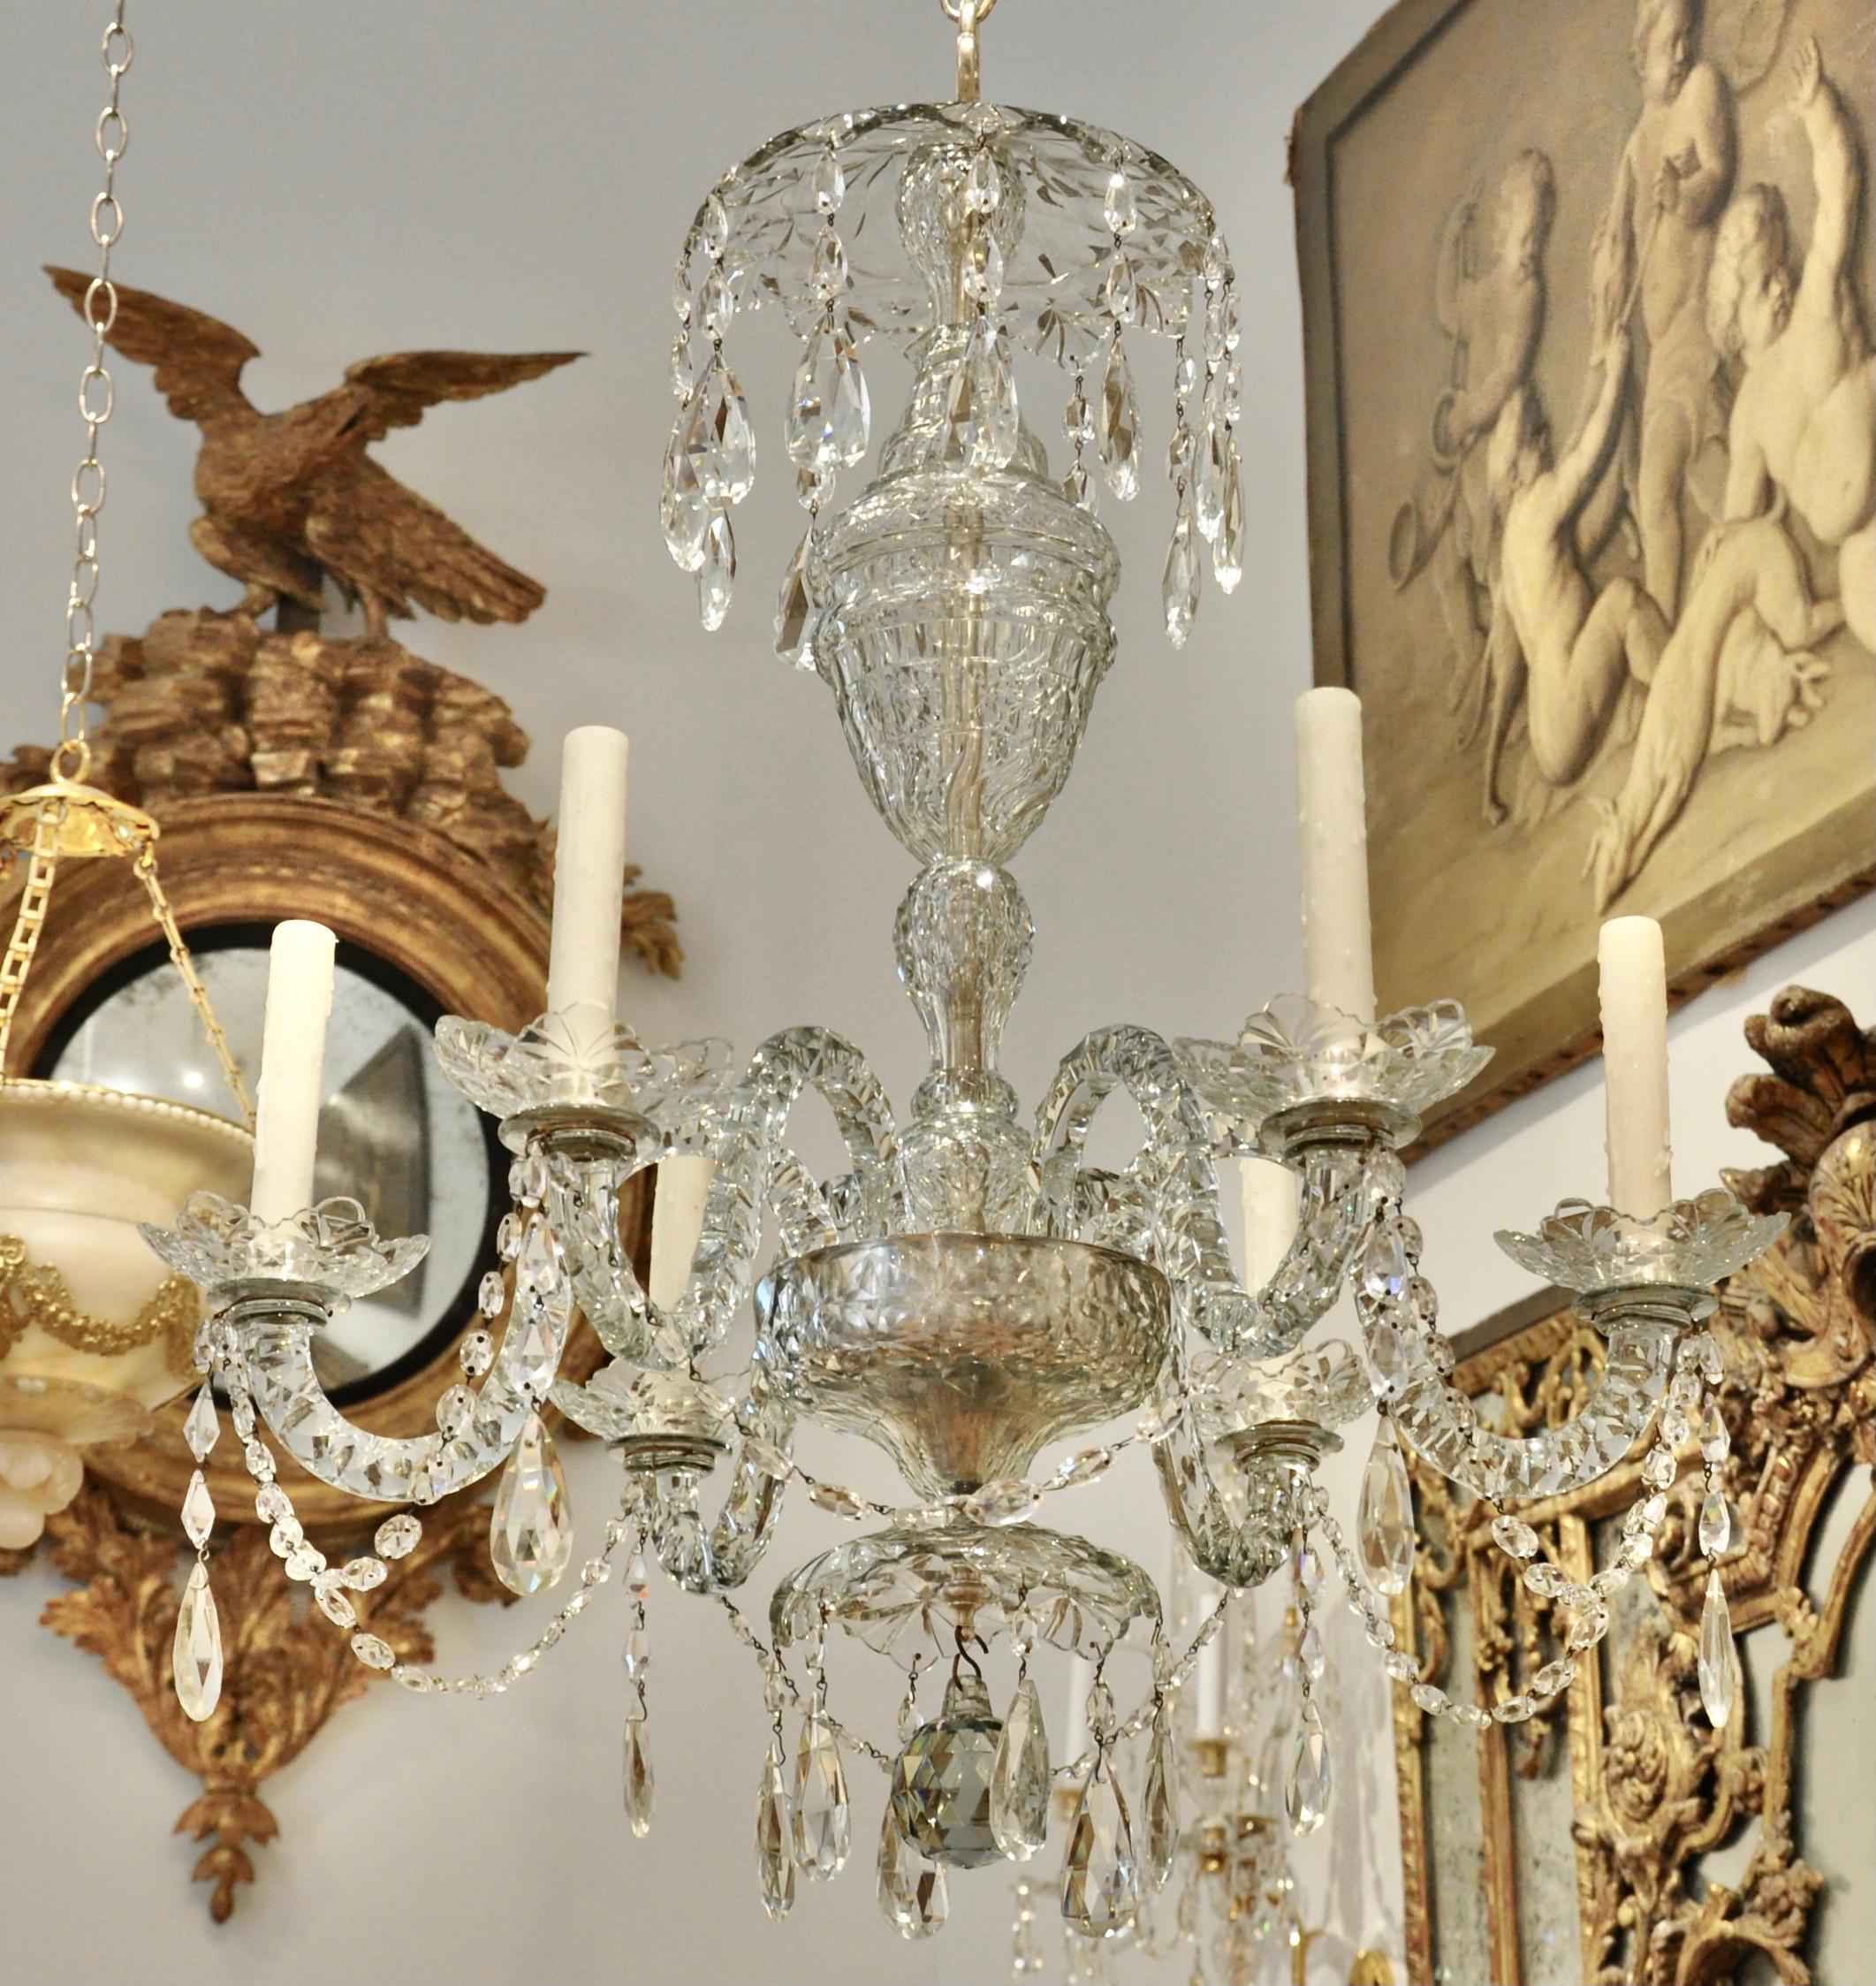 19th century Irish Georgian style hand cut crystal chandelier. Six arms issuing from a cut crystal dish. Urn shaped shaft and canopy. All original throughout. Silvered mounts.

--Will be French wired to US Standards at customer's request (about